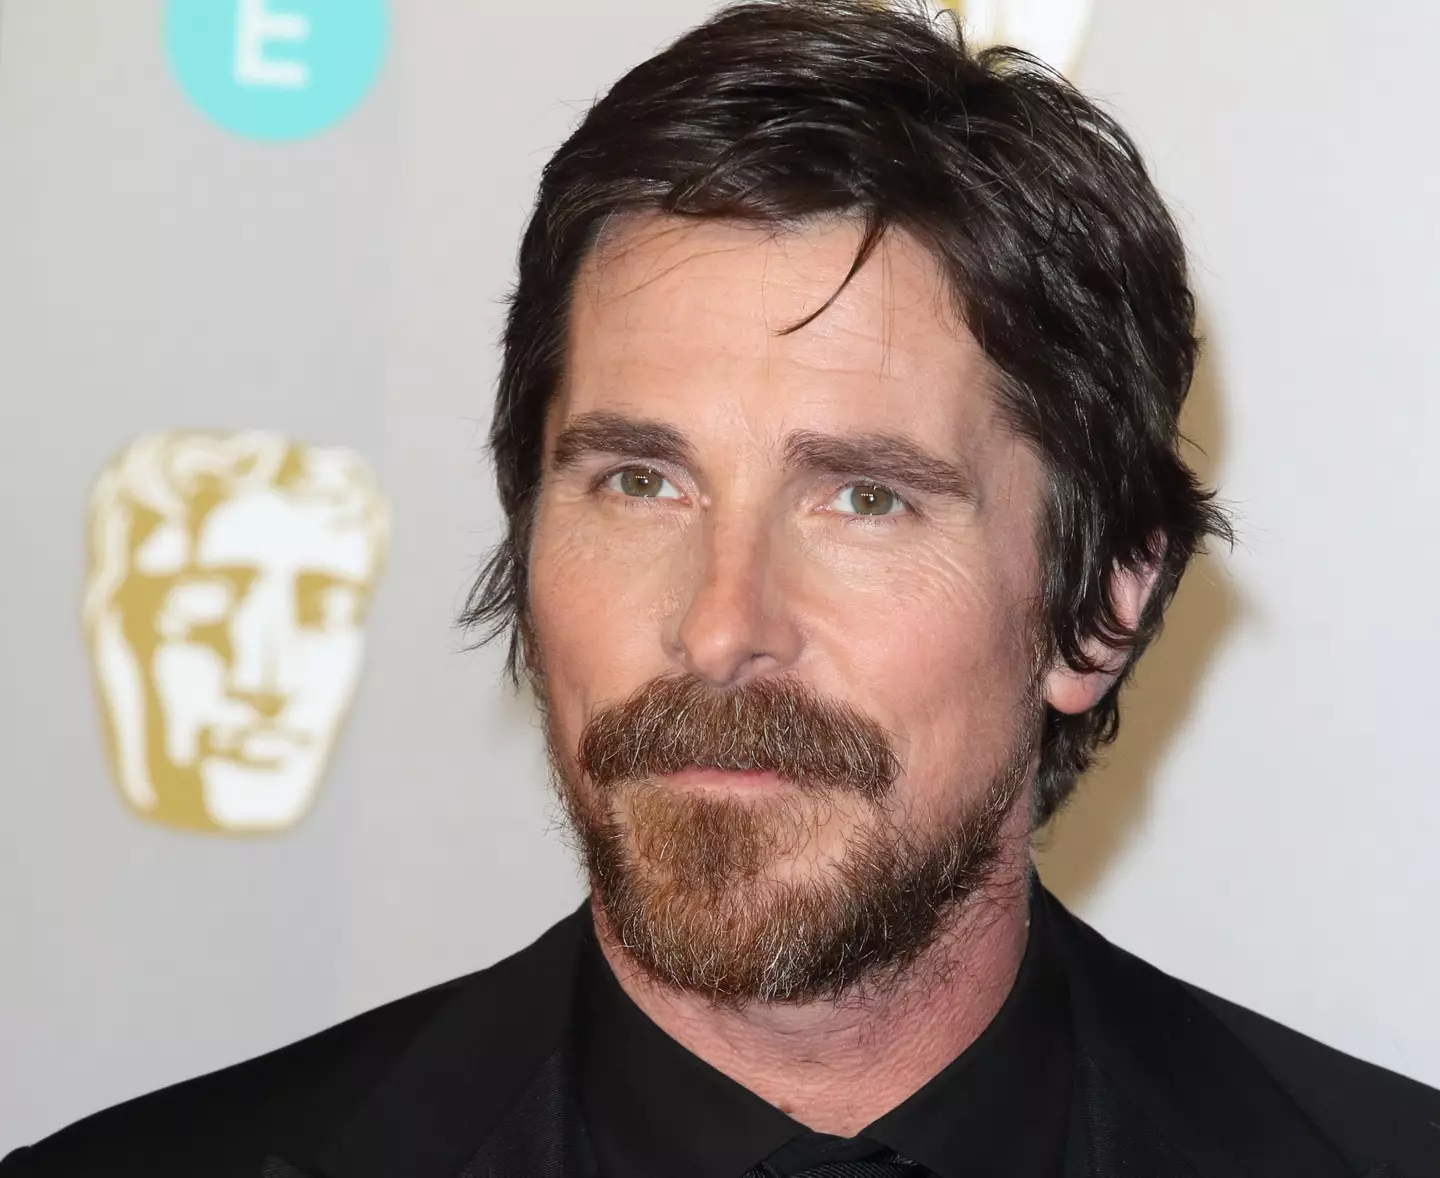 Christian Bale says it would be a 'delight' to land a role in Star Wars.